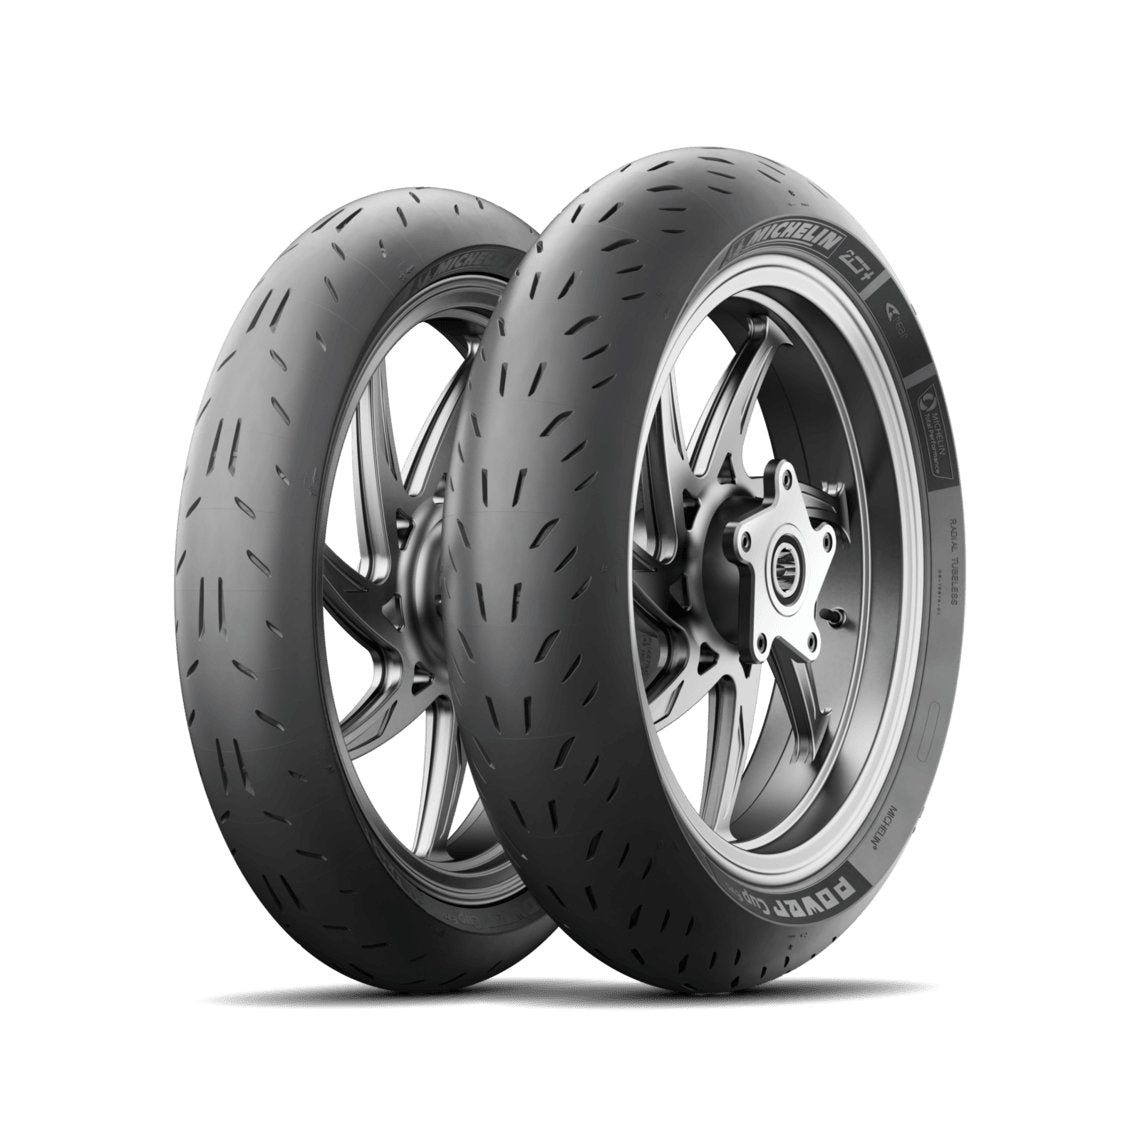 Set Gomme Michelin Power Cup Evo - GBR Performance